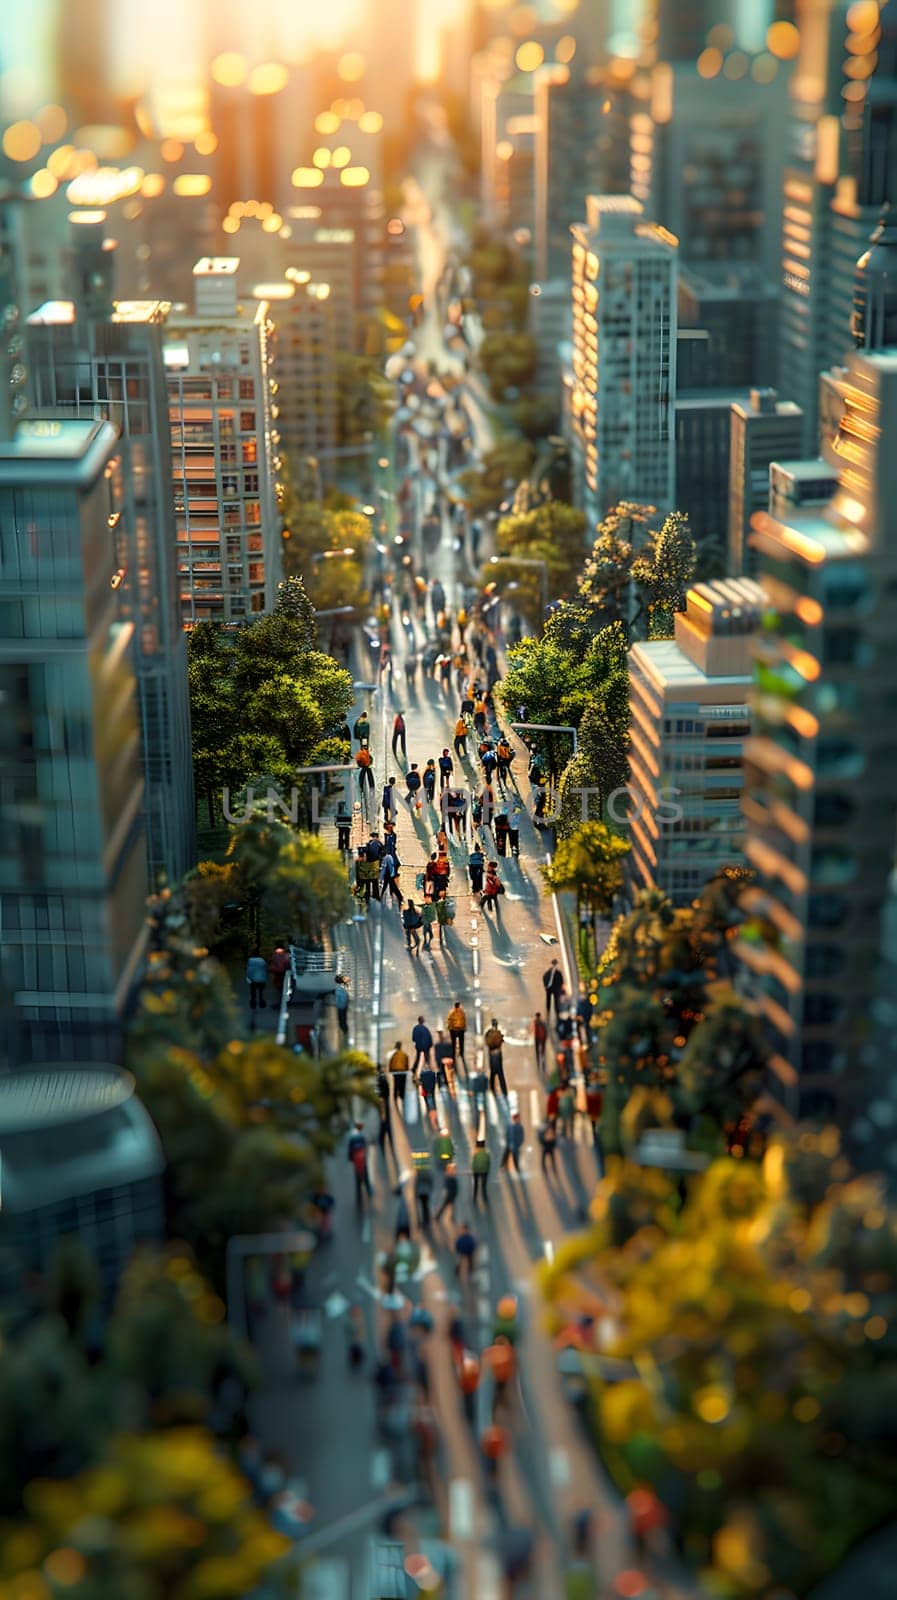 People walking down city street, surrounded by skyscrapers and urban design by Nadtochiy